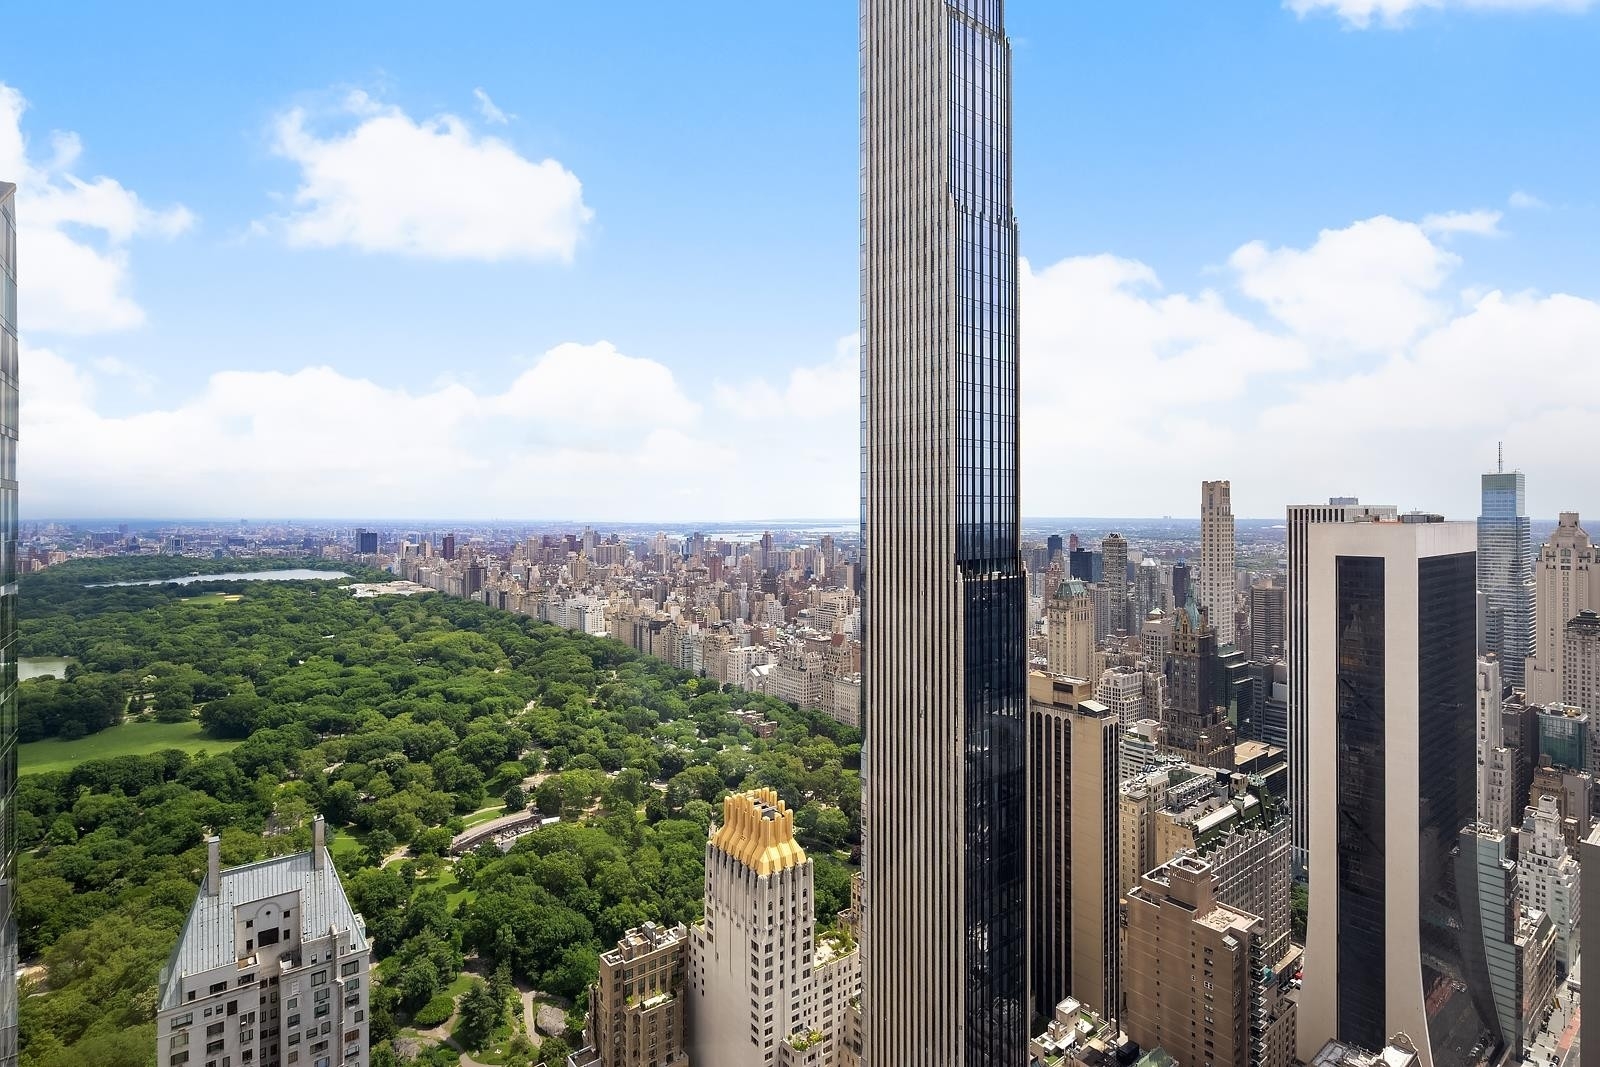 Condominium for Sale at Metropolitan Tower, 146 W 57TH ST, 76CD Midtown West, New York, NY 10019